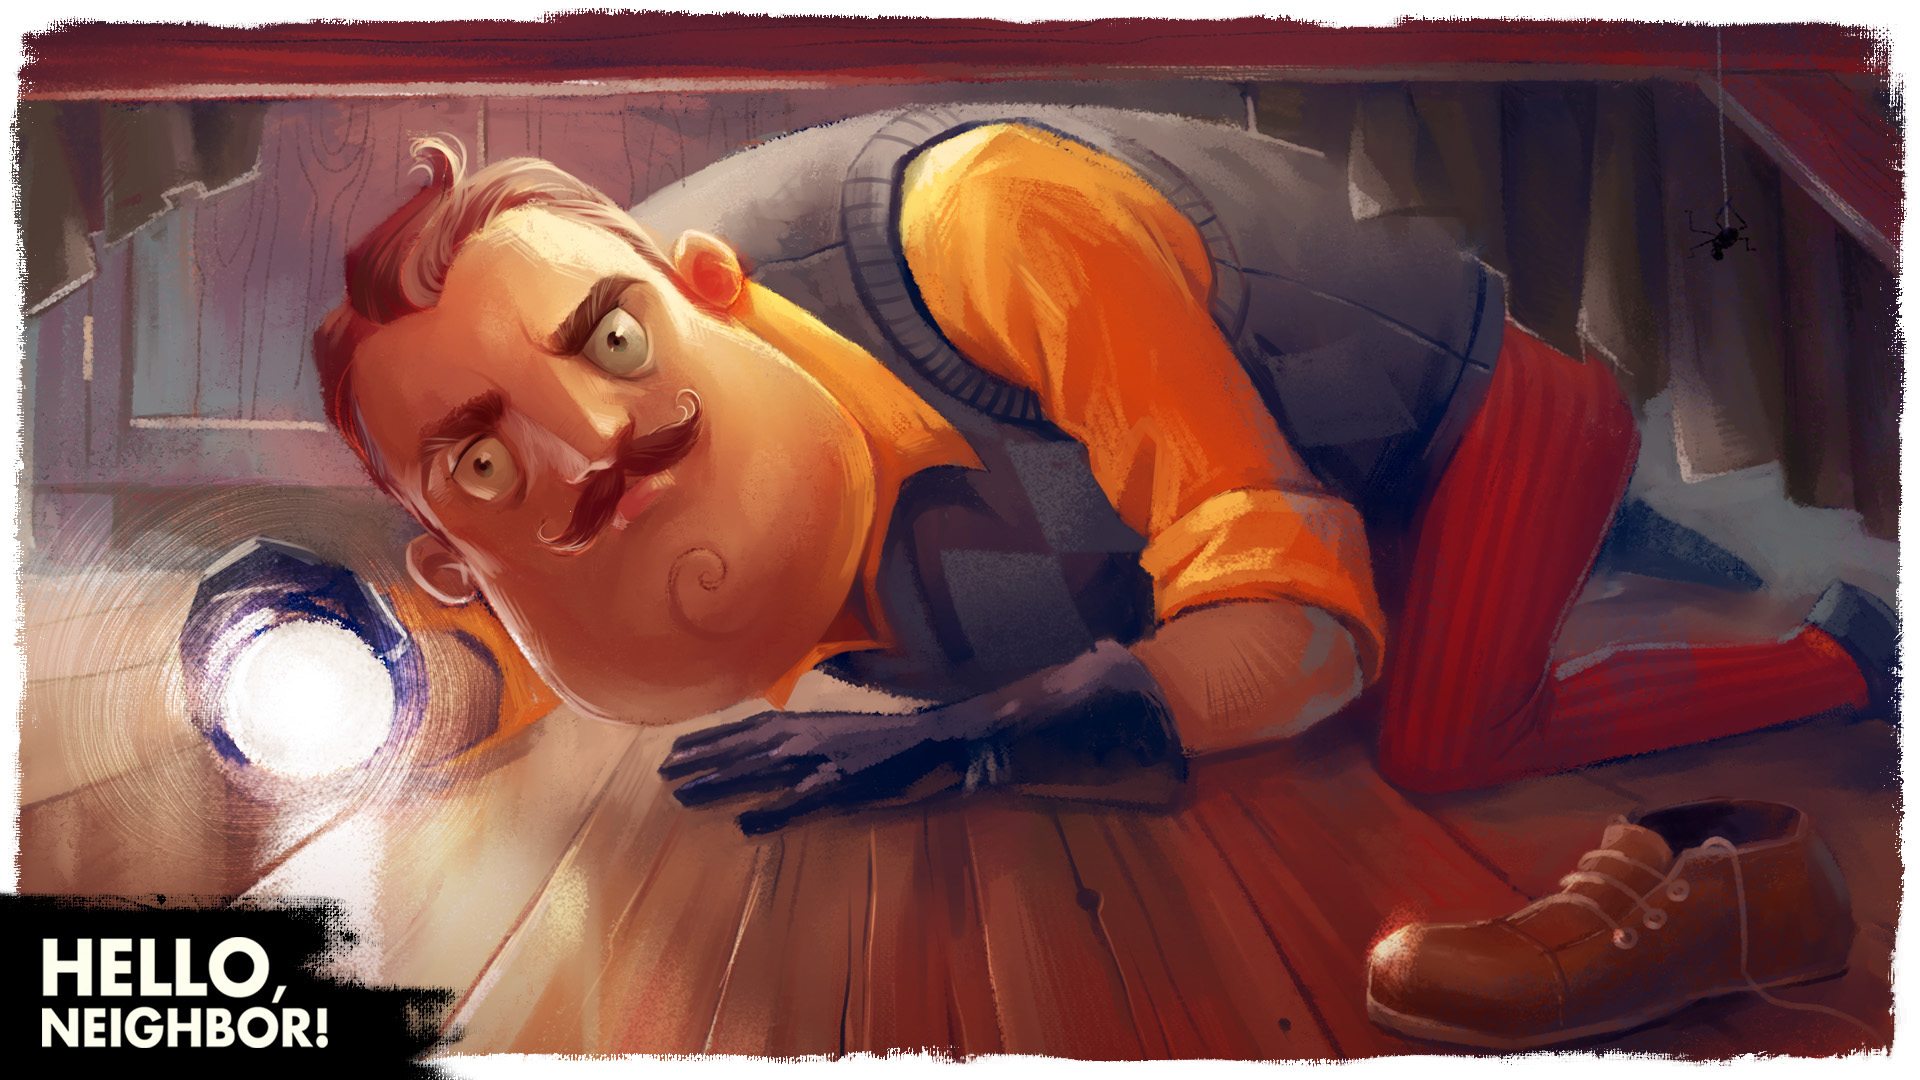 Unreal Engine We Caught Up With Tinybuild During To Learn More About The Compelling And Creepy World Of Hello Neighbor Ue4 T Co Chxsa9wt4h Twitter